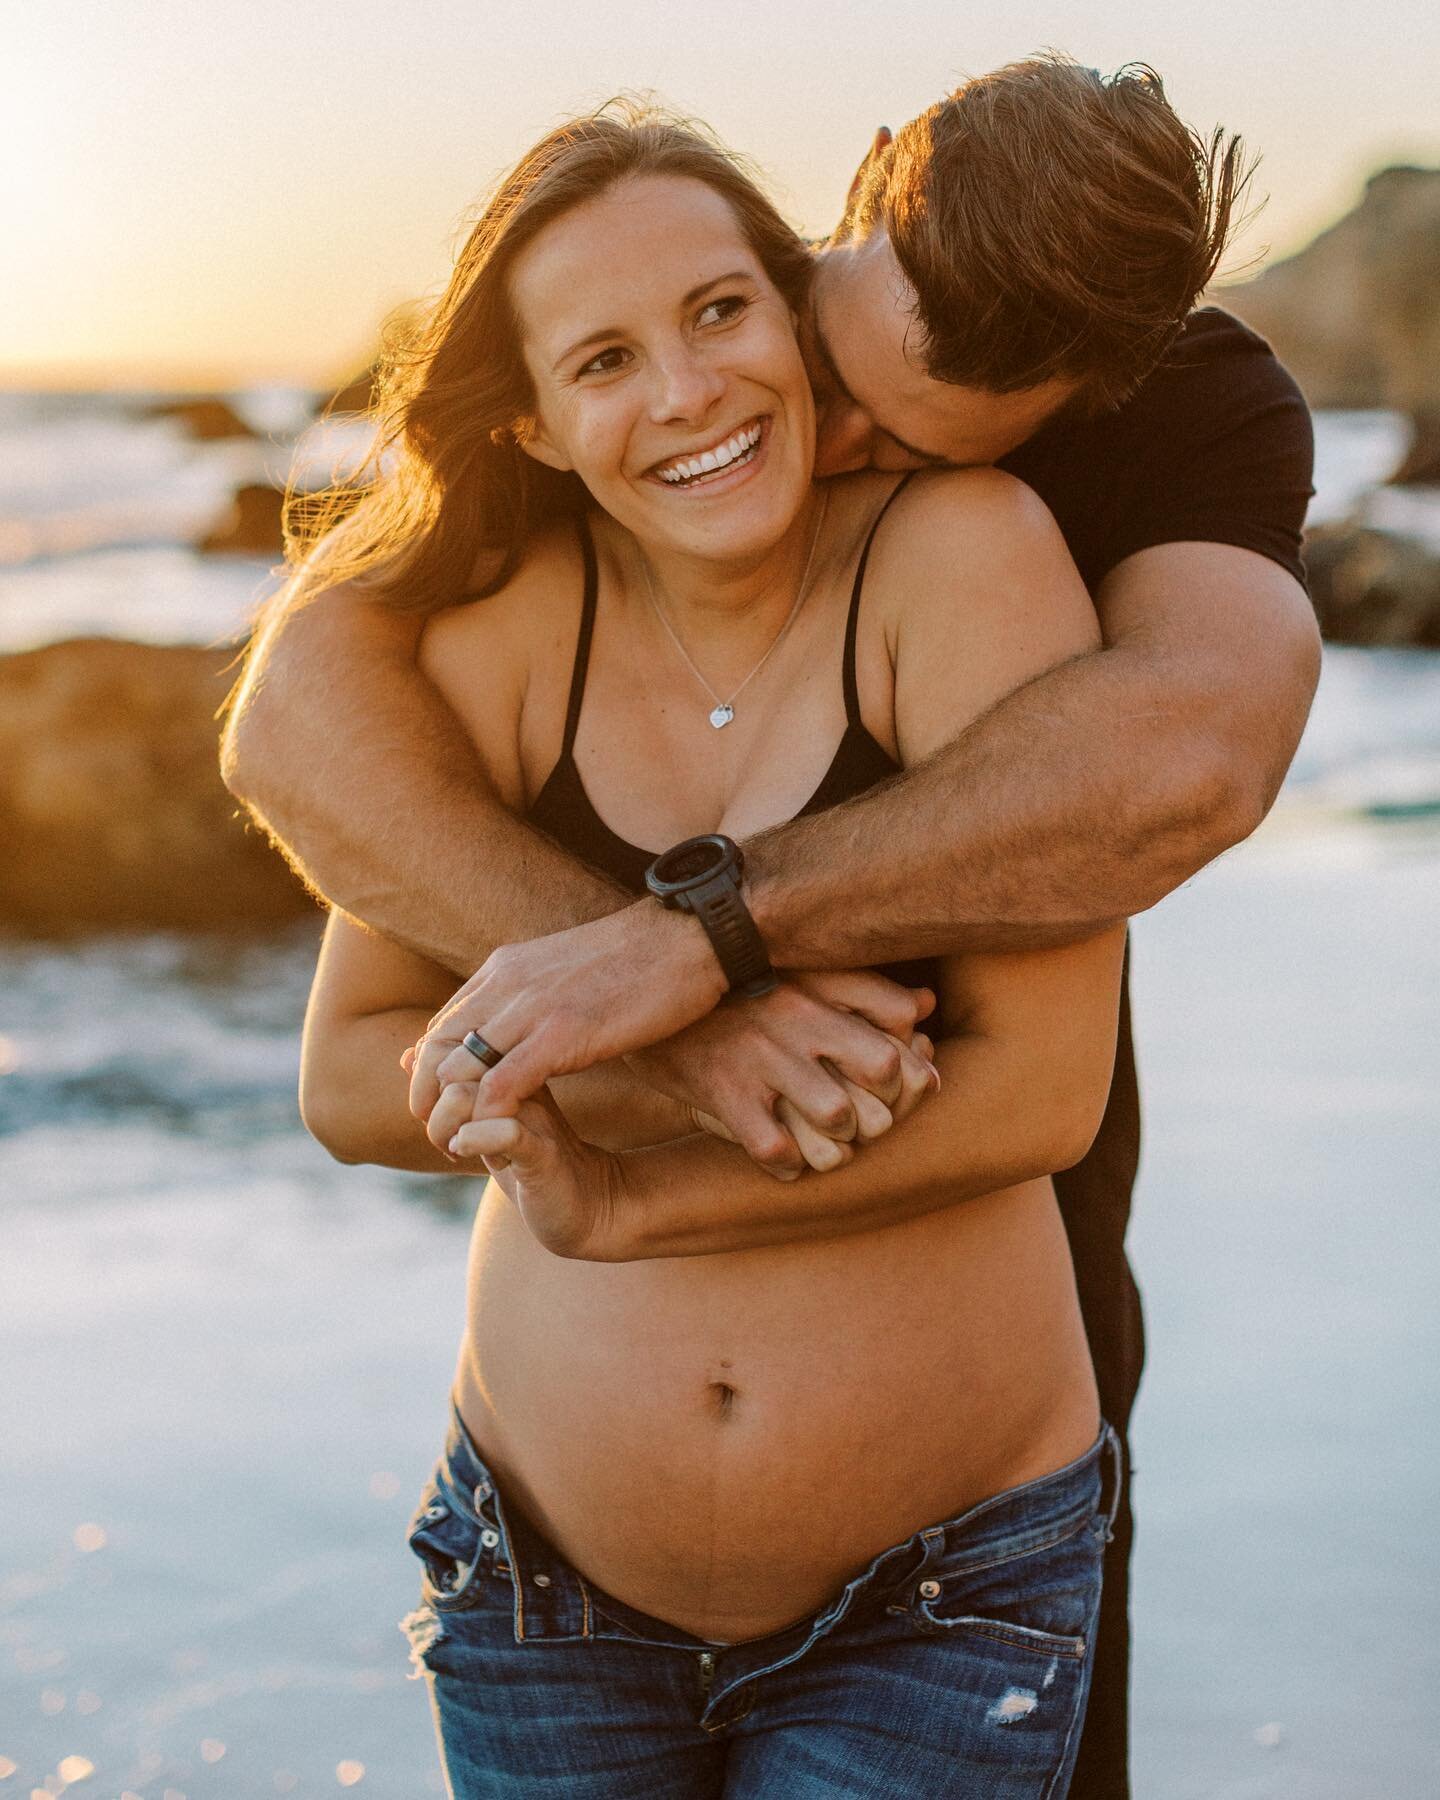 Overflowing joy finally meeting their baby boy 💙

Congratulations to these two cuties who welcomed their little one to the world this week!
.
.
.
.
.

#portraitphotography #portraitphotographer #venturacounty #malibu #santabarbaracounty #southerncal